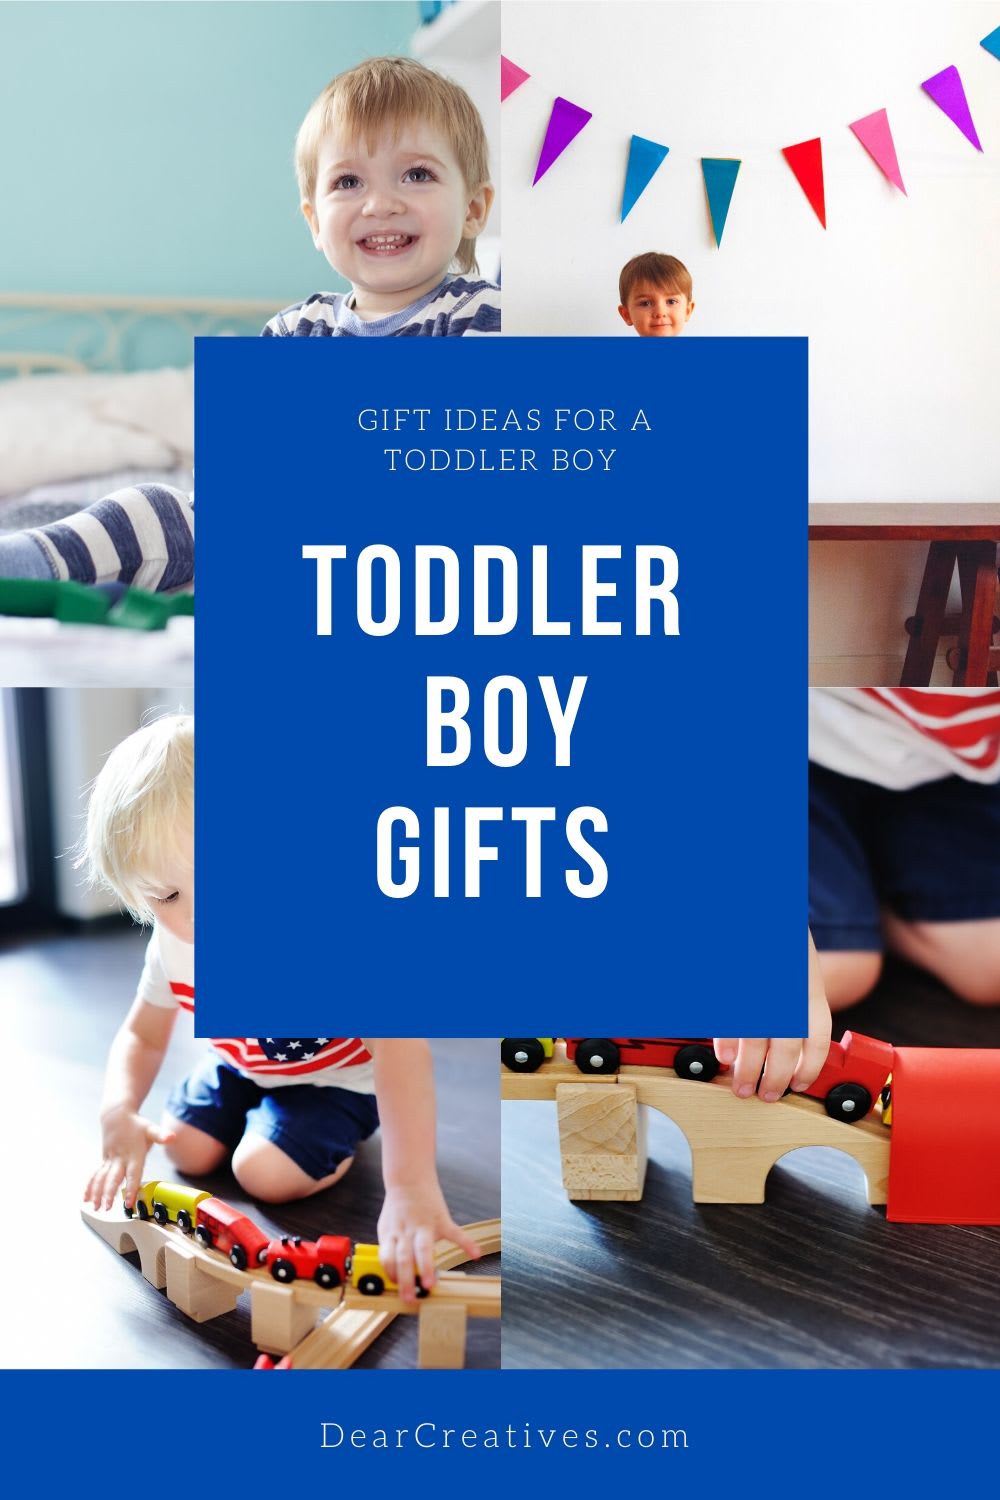 Toddler Boy Gifts They Will Love!